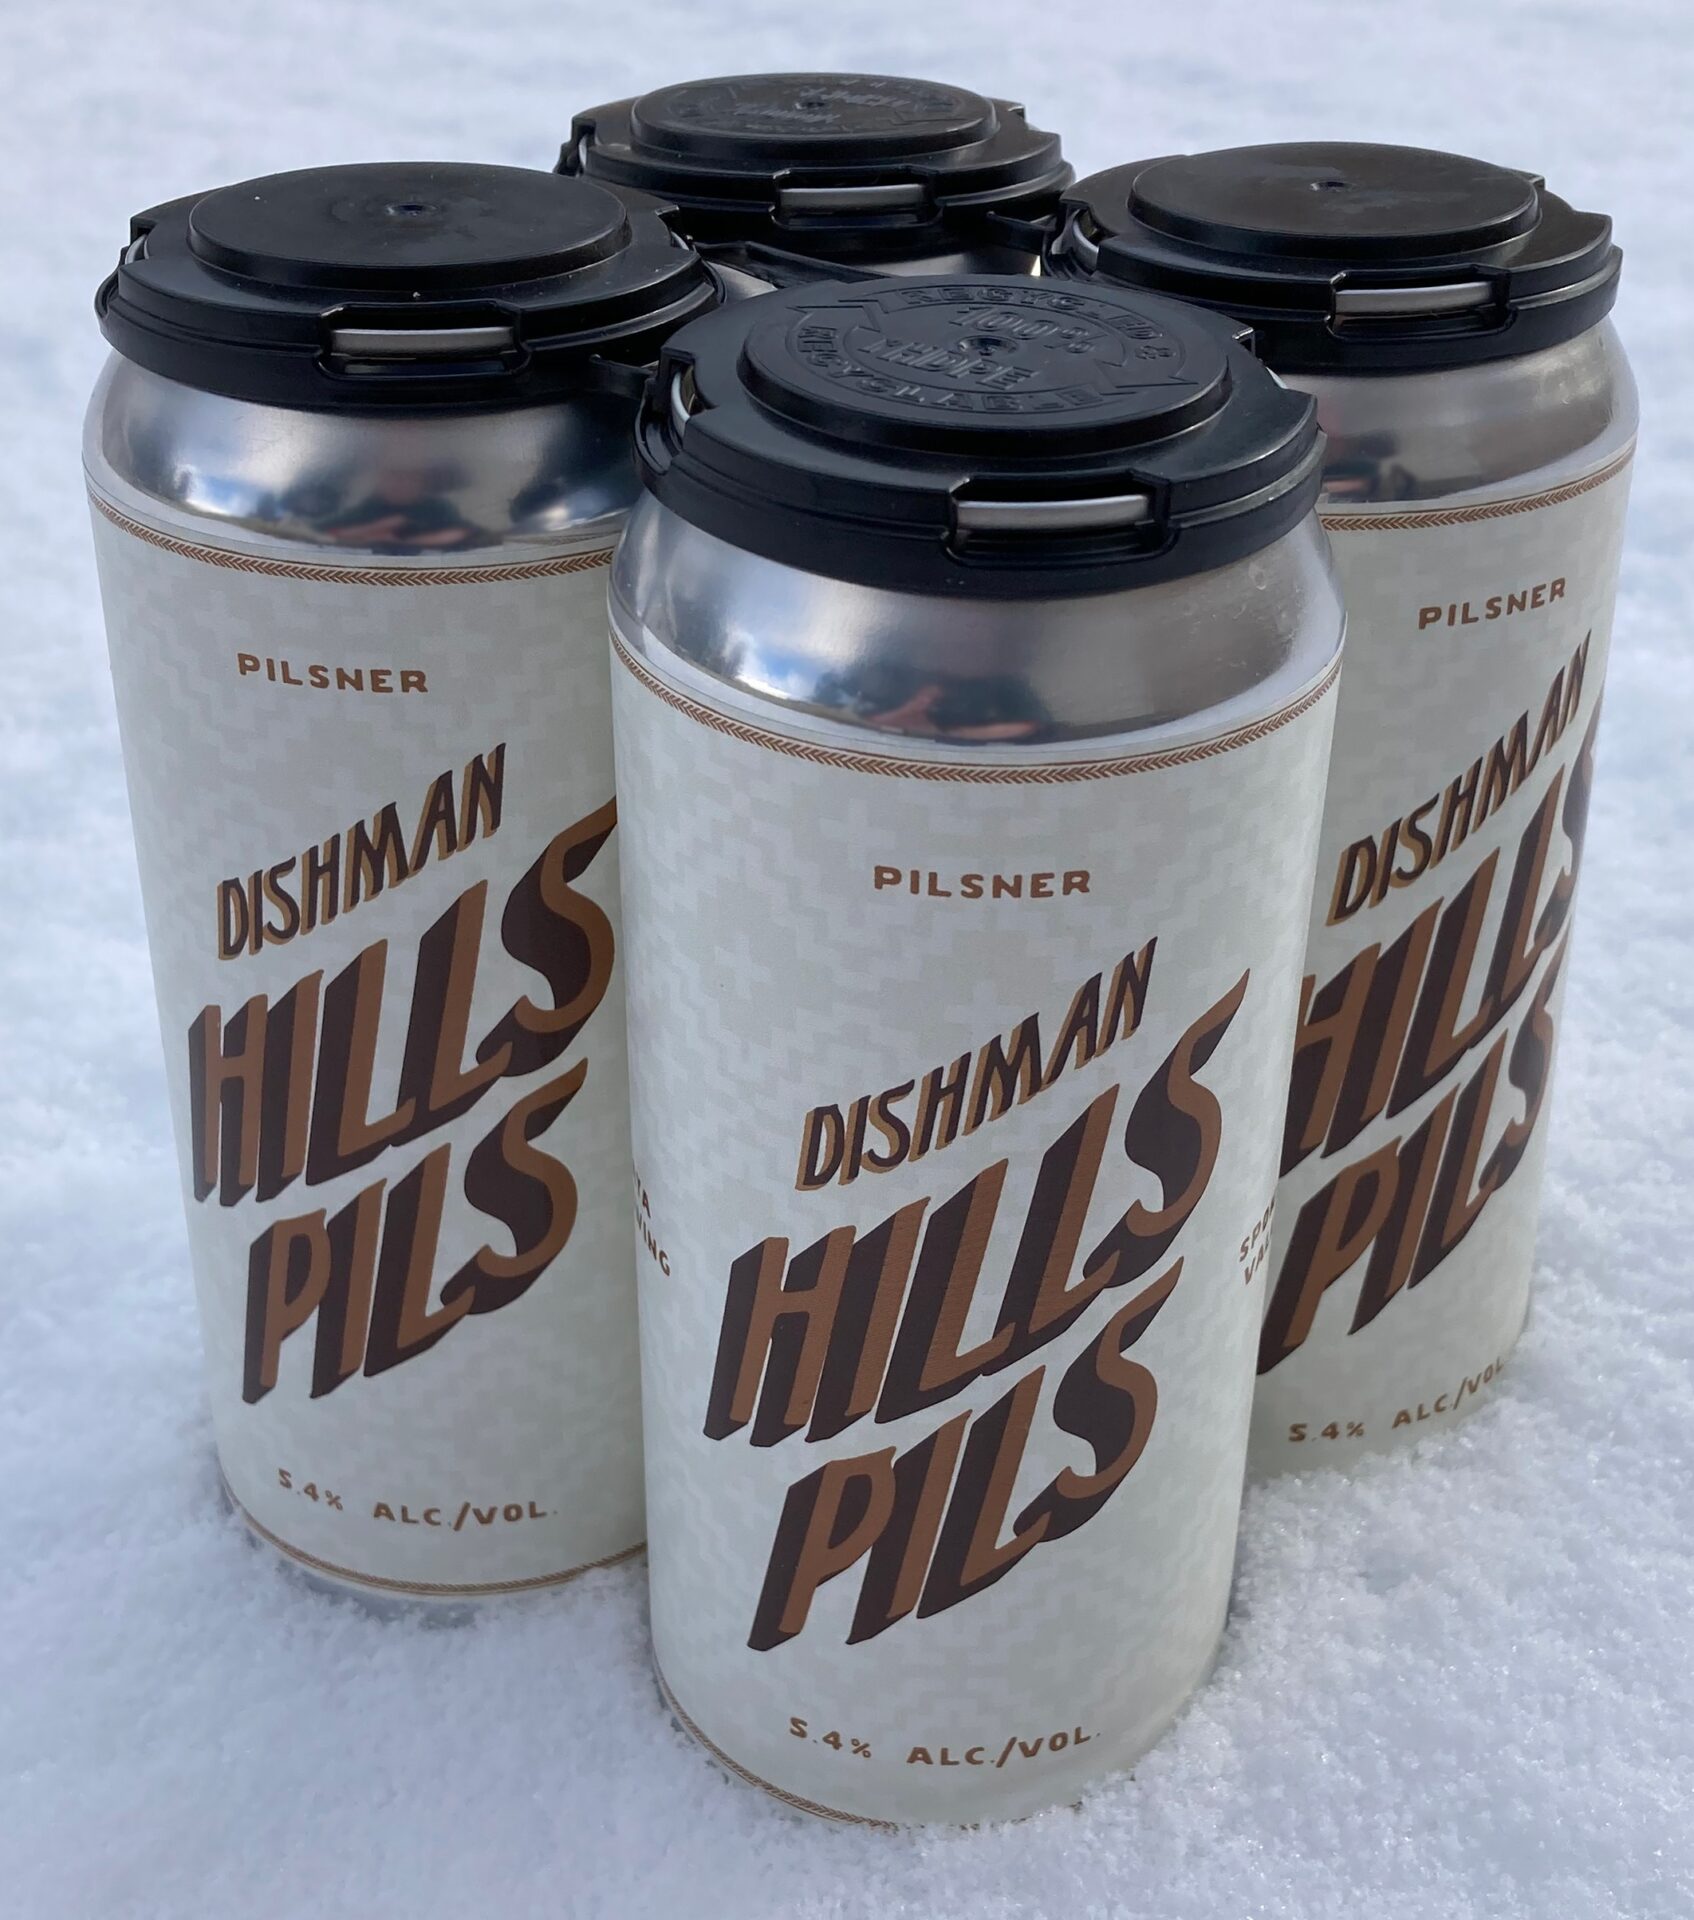 Dishman Hills Pils from Yaya Brewing - 4 cans sitting on snow.